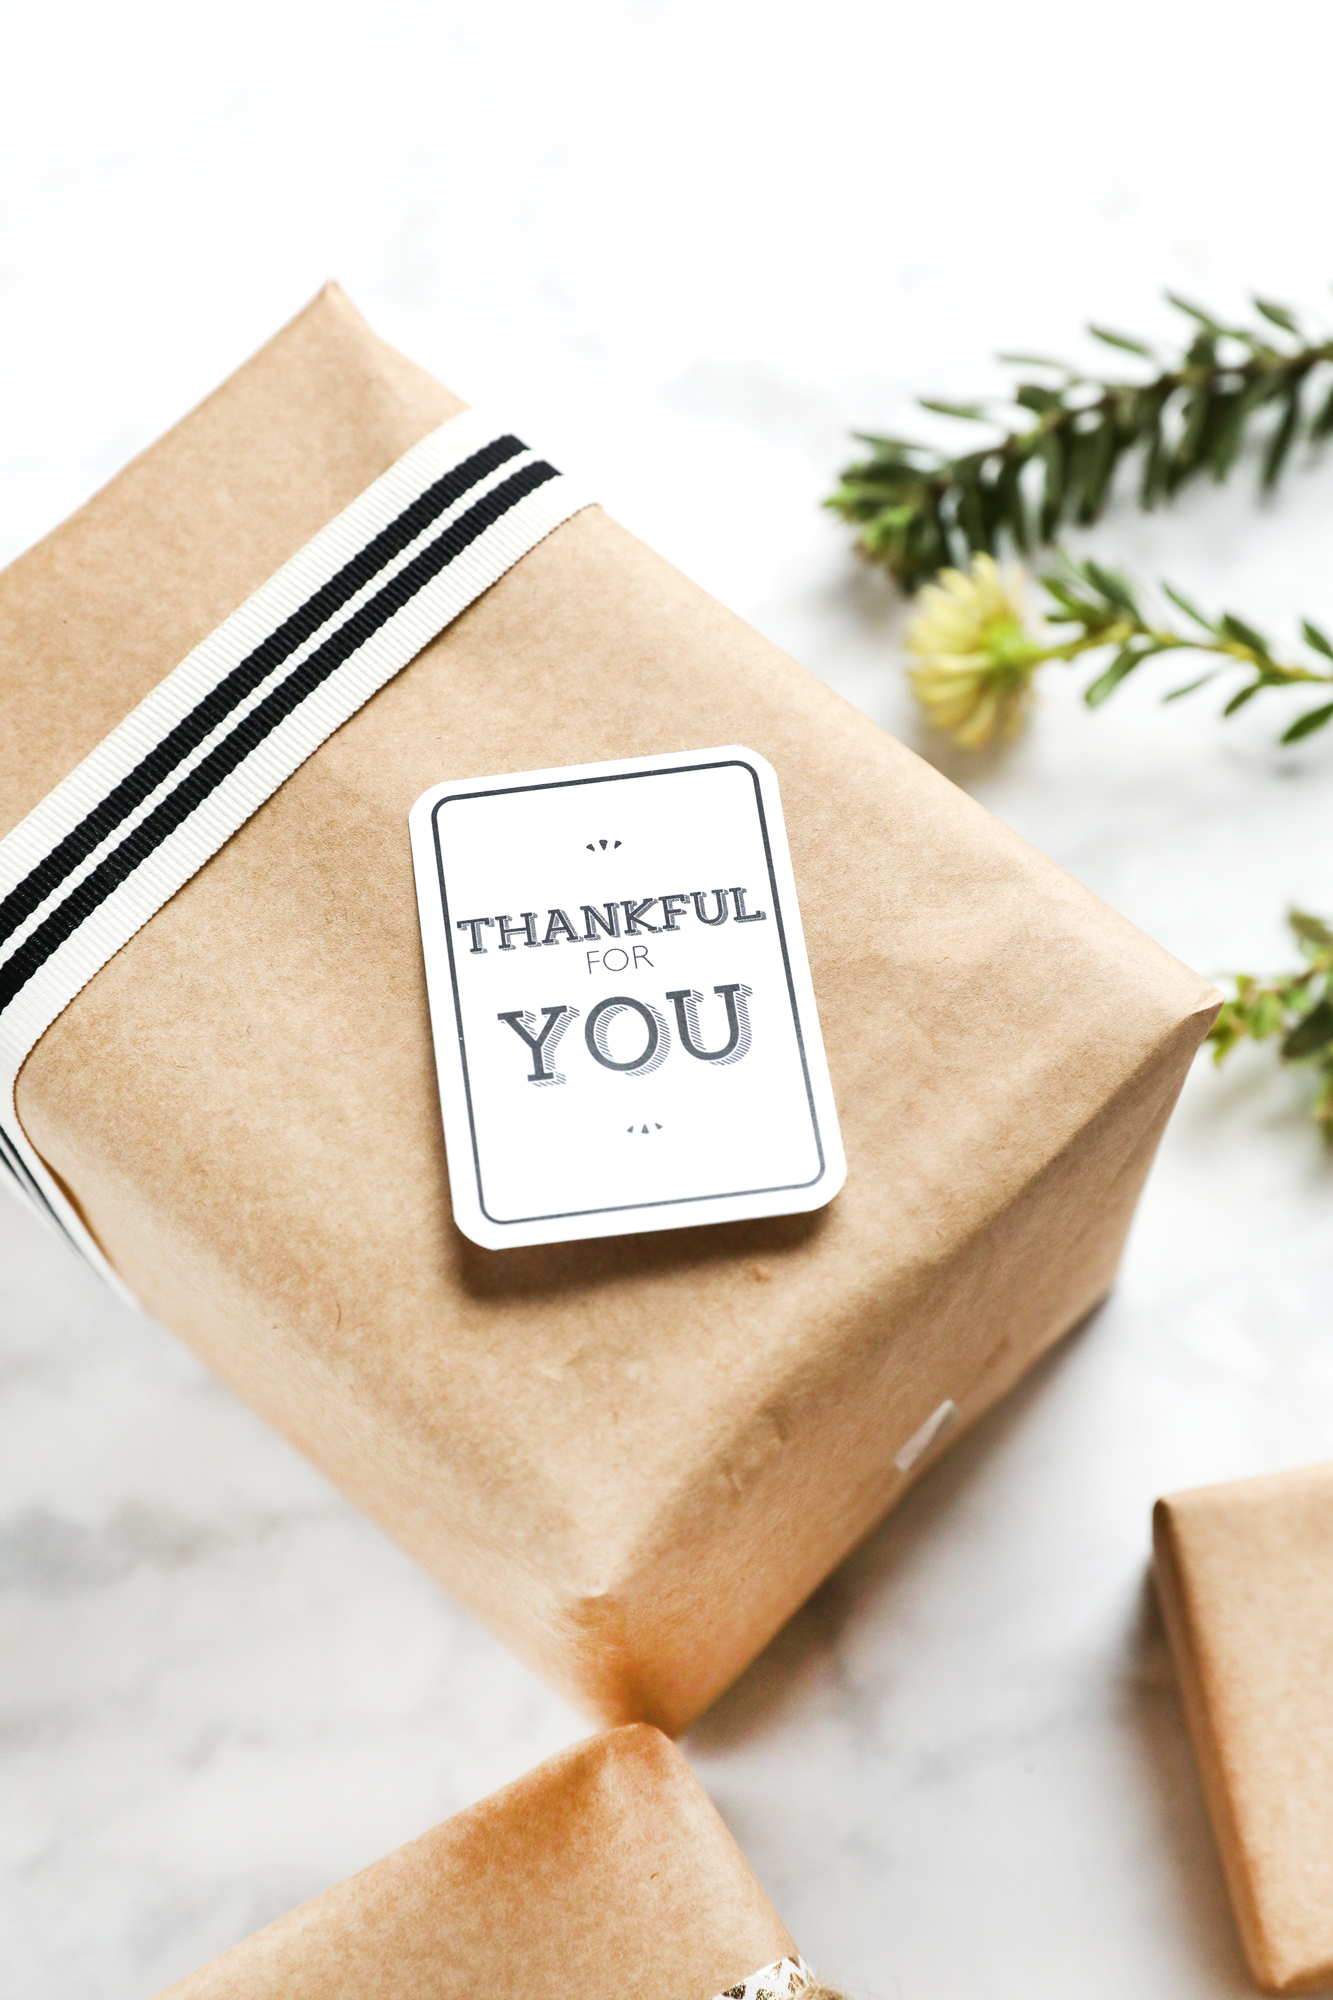 Thankful for you gift labels